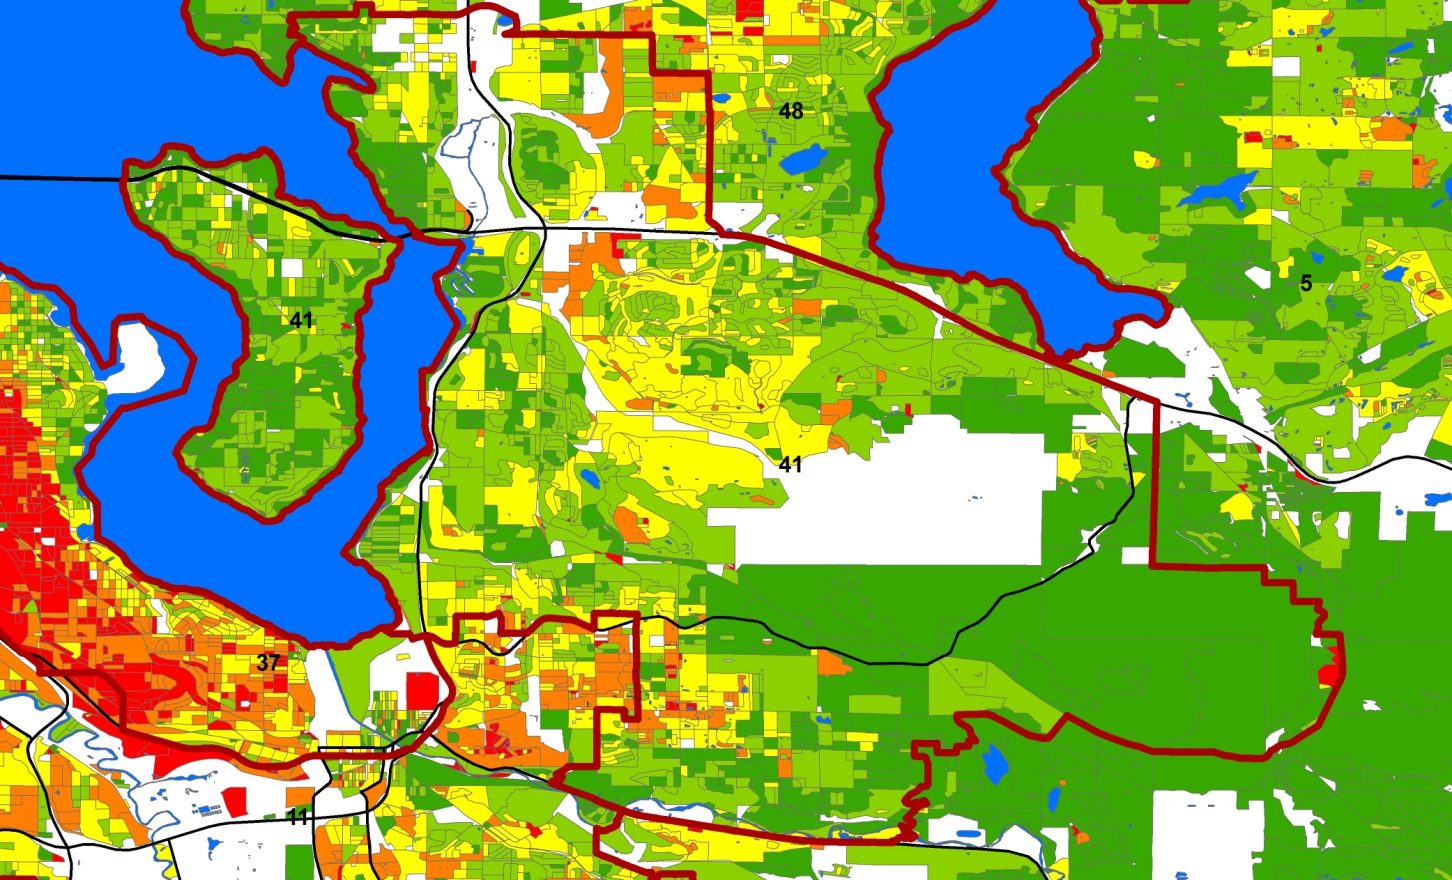 c:\users\nadshiroma\documents\redistricting 2011\proposed ld 48\1 poc curr ld 41.jpg